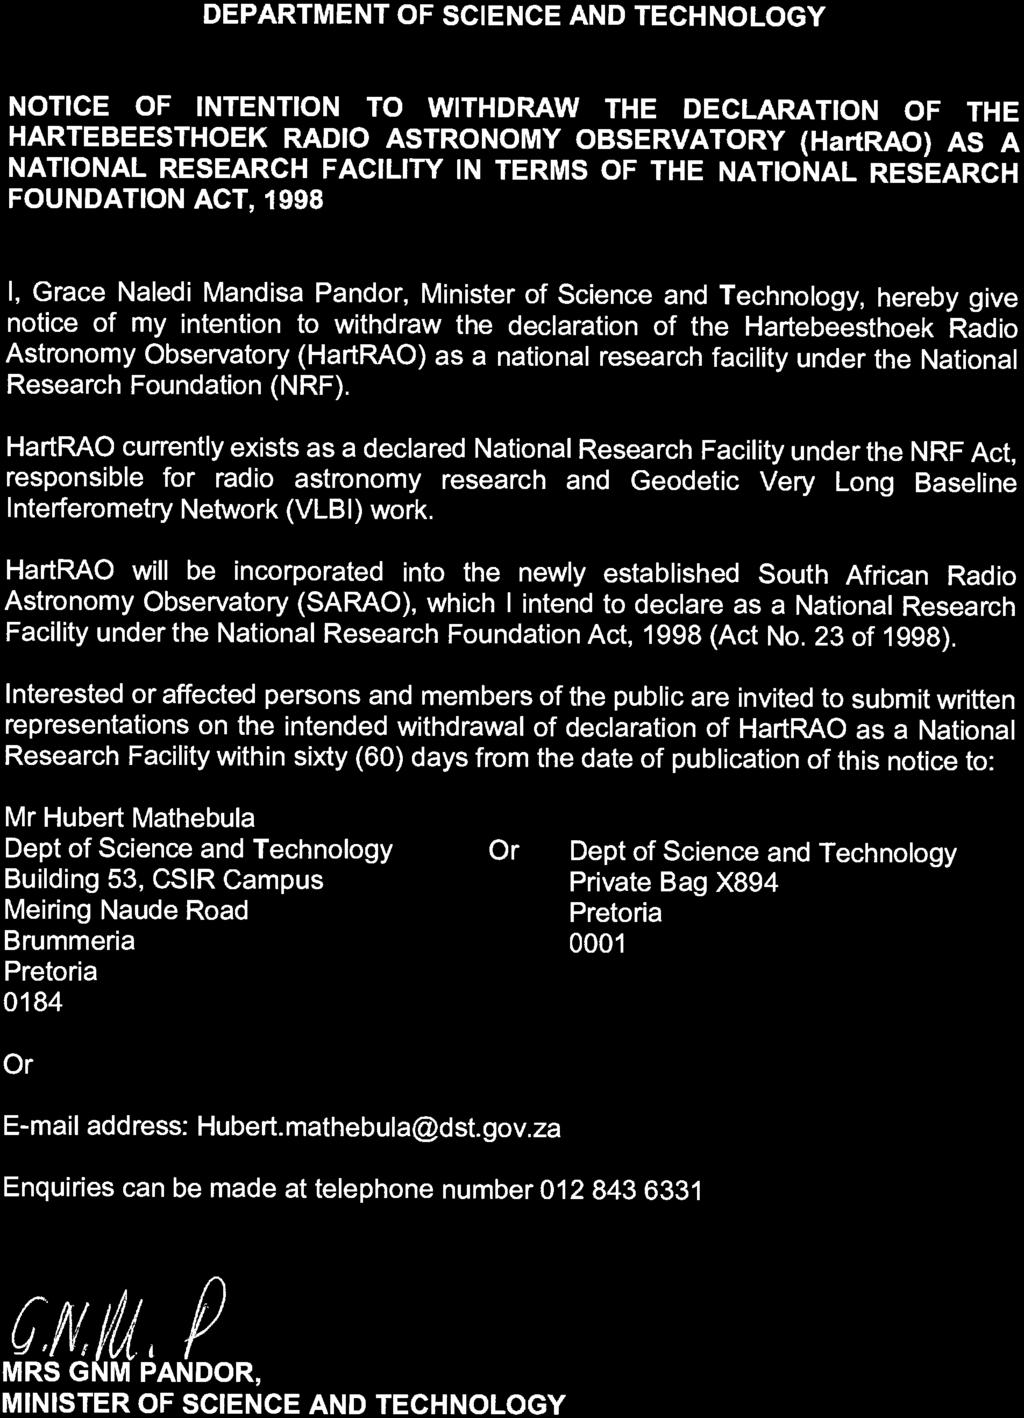 368 National Research Foundation Act, 1998: Notice of intention to withdraw the Declaration of the Hartebeesthoek Radio Astronomy Observatory (HartRAO) as a National Research Facility 40793 60 No.